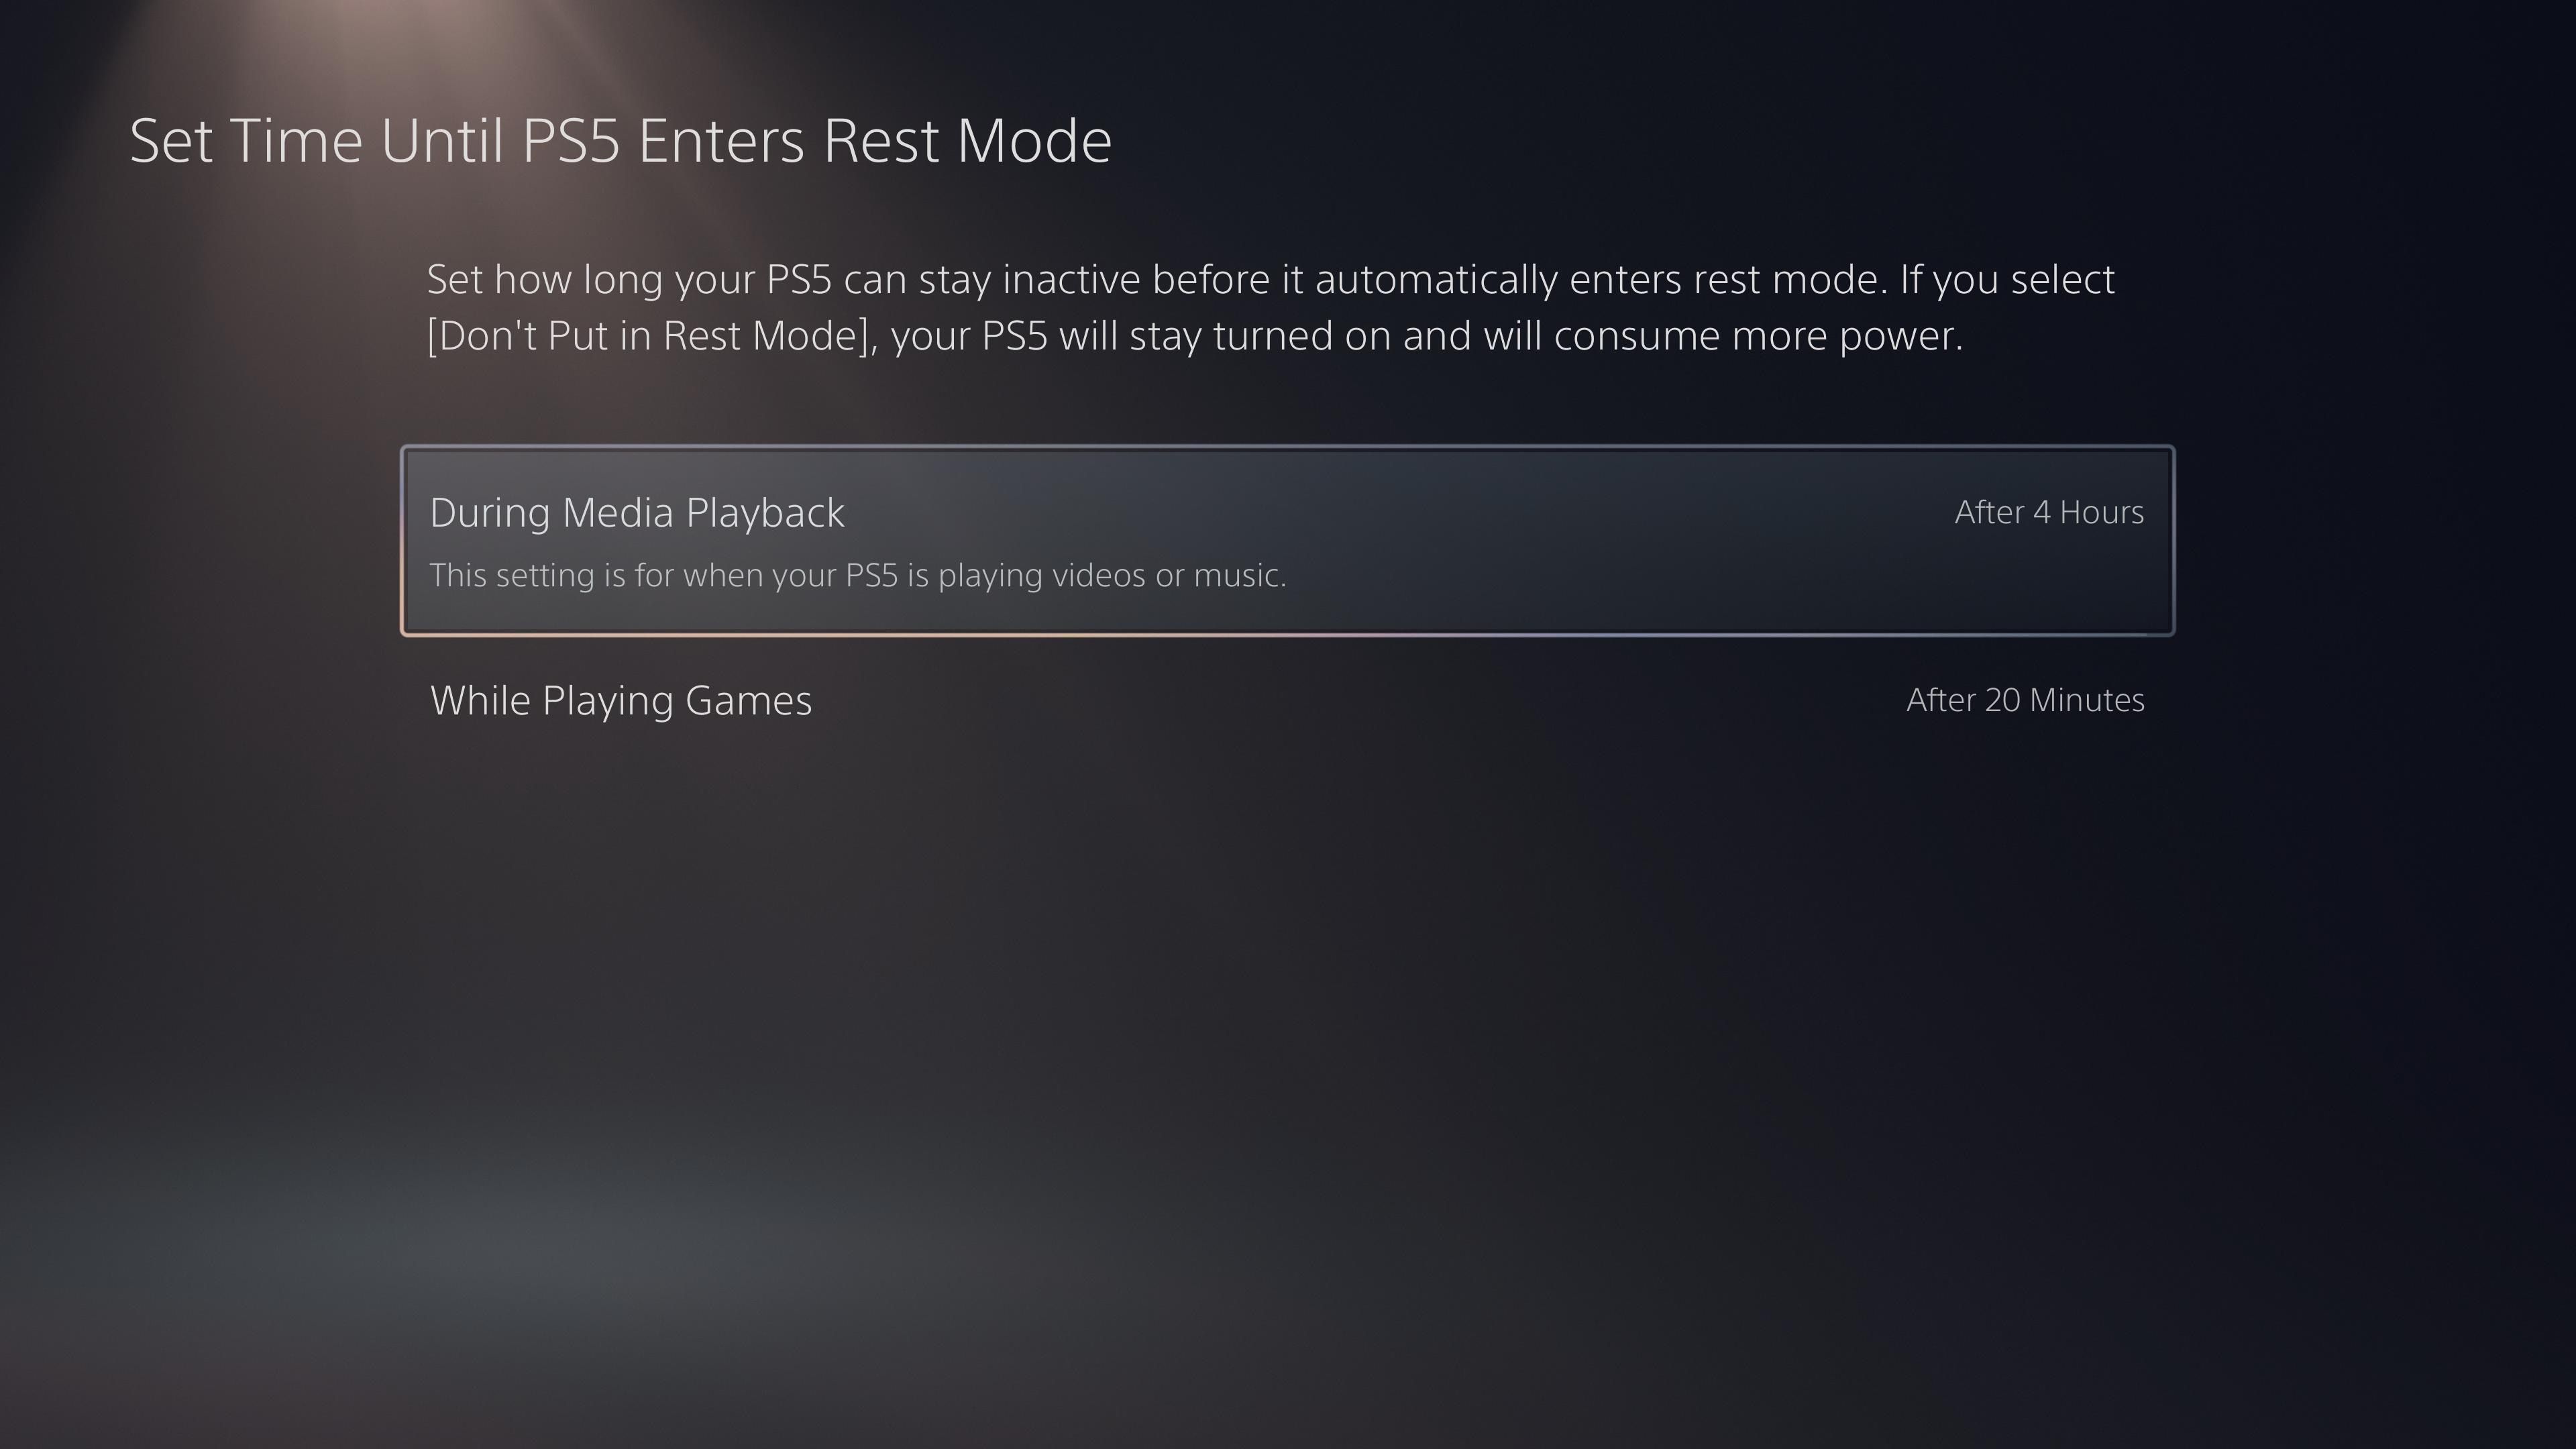 Set how long it takes before your PS5 enters rest mode.